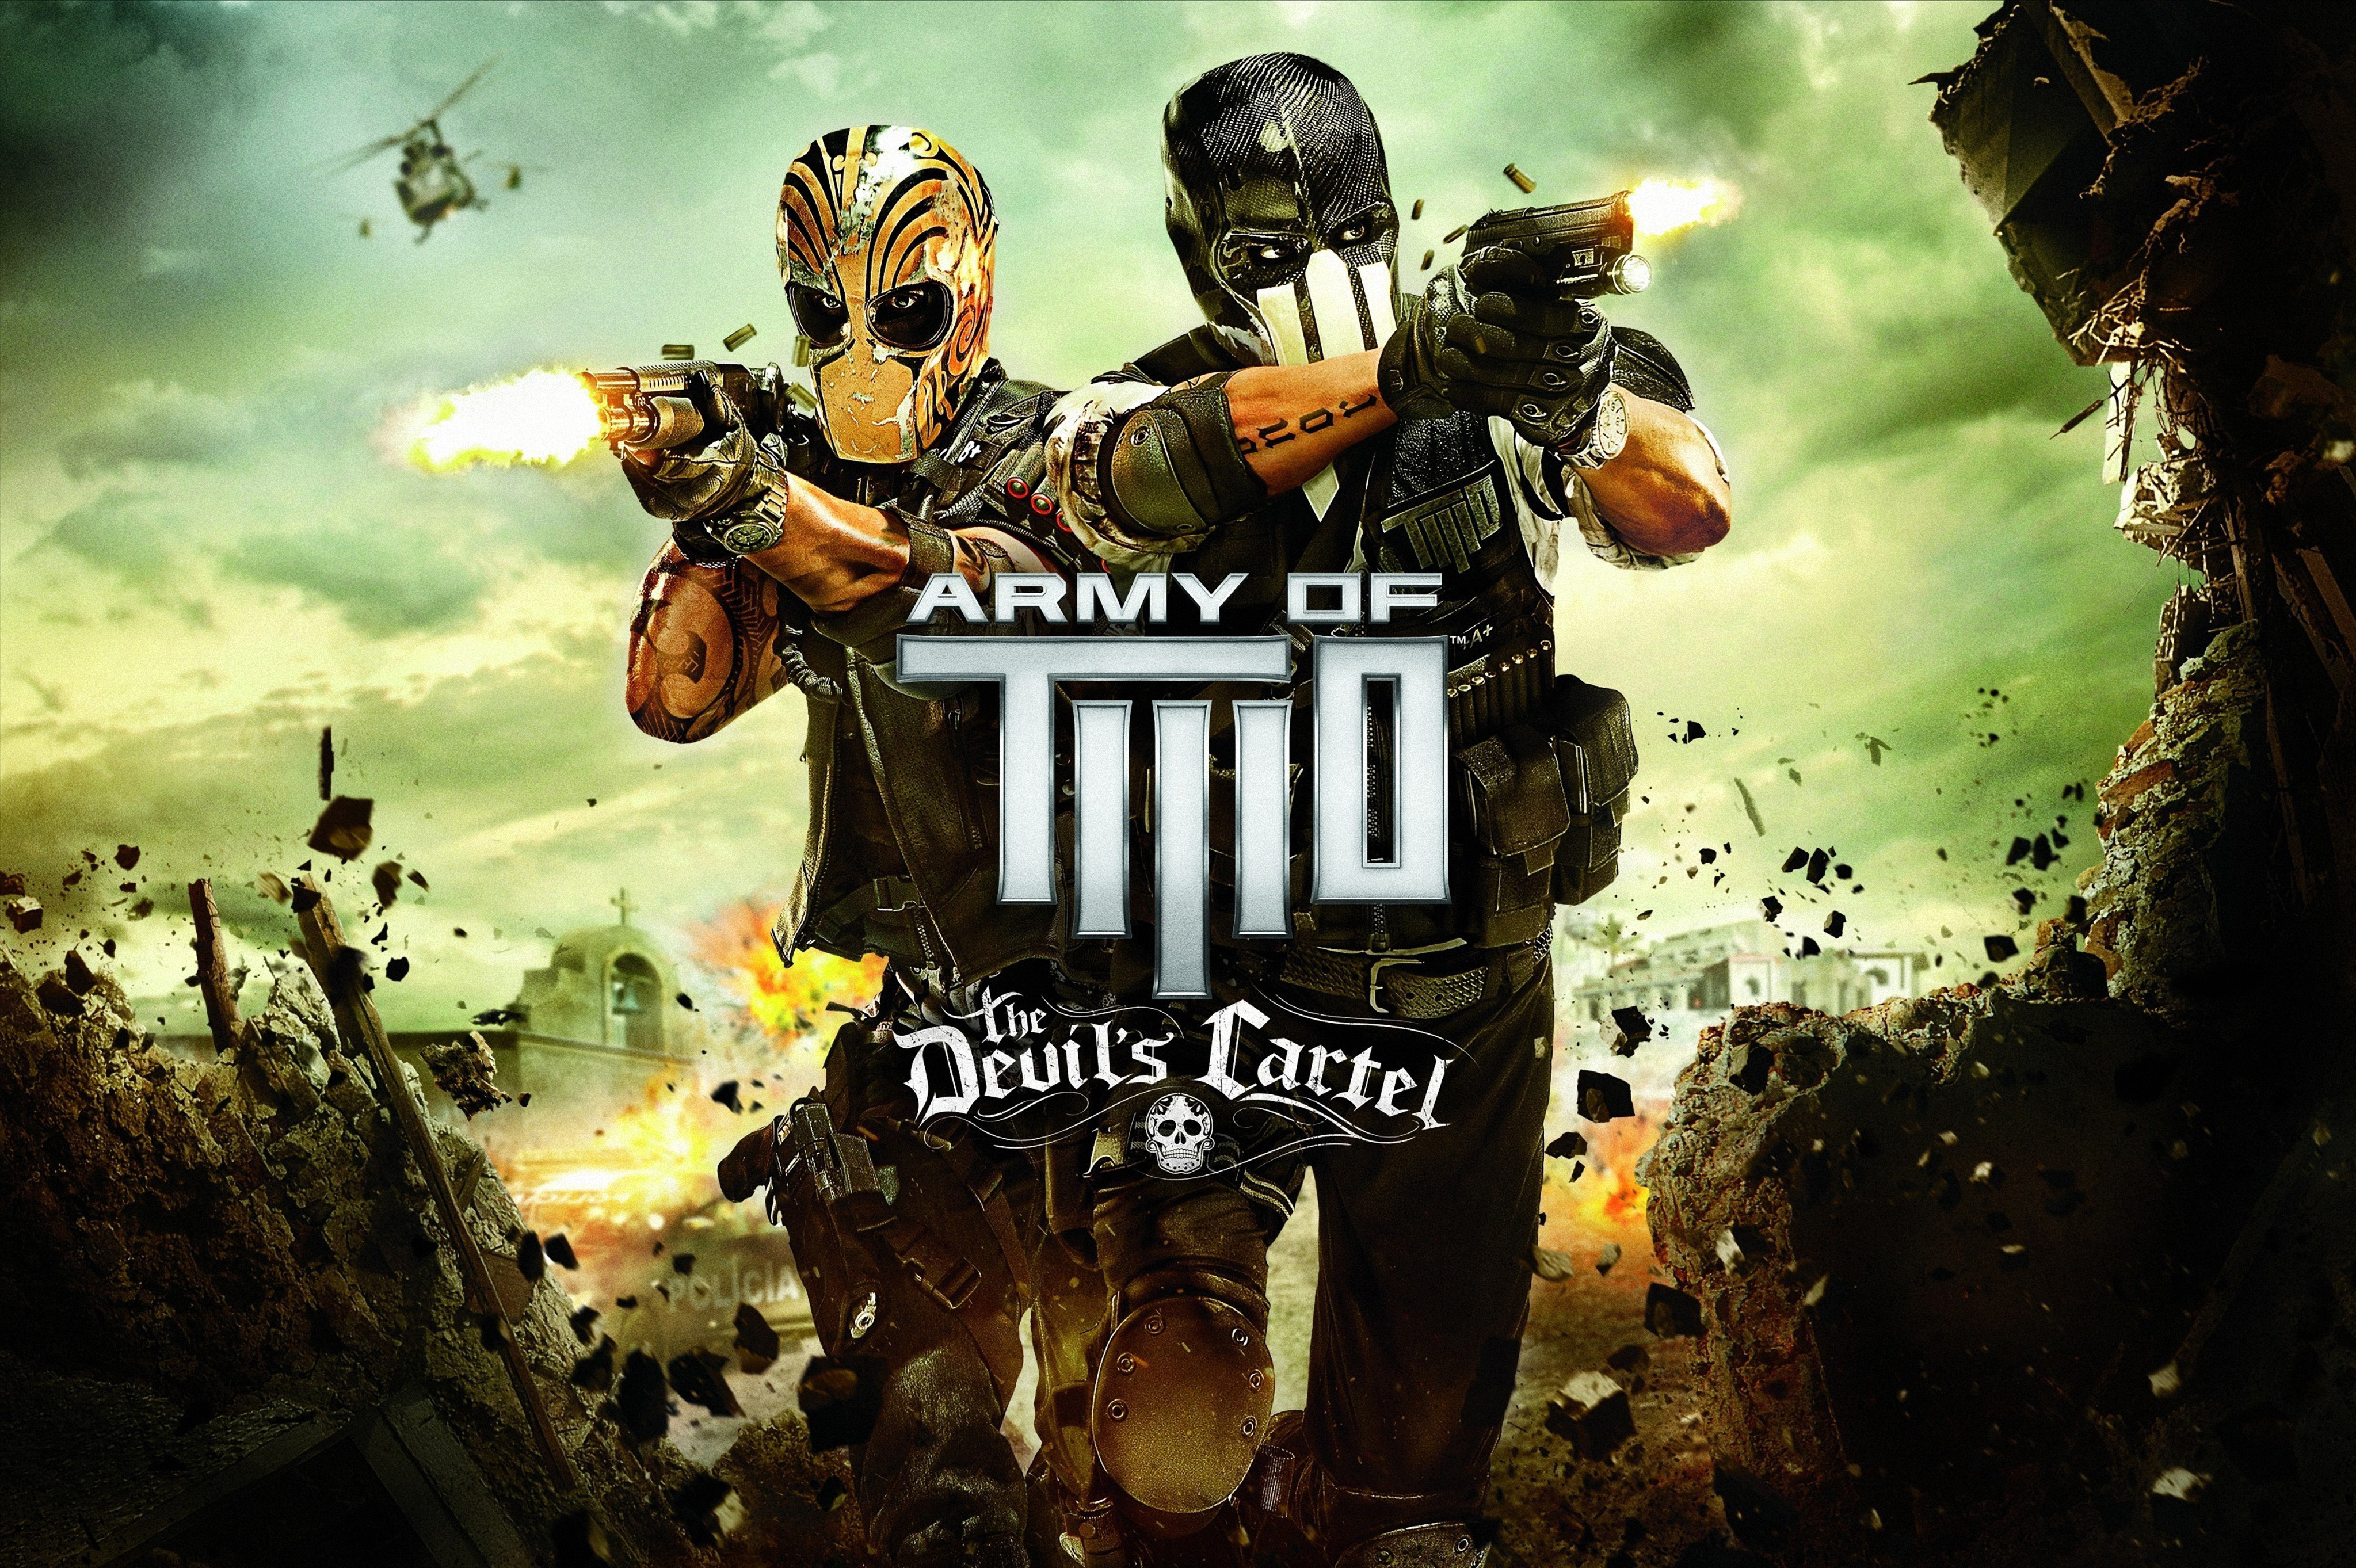 Gaming posters. Army of two the Devil's Cartel ps3. Army of two the Devil's Cartel ps3 обложка. Army of two the Devil's Cartel Xbox 360. Игра Army of two 3.